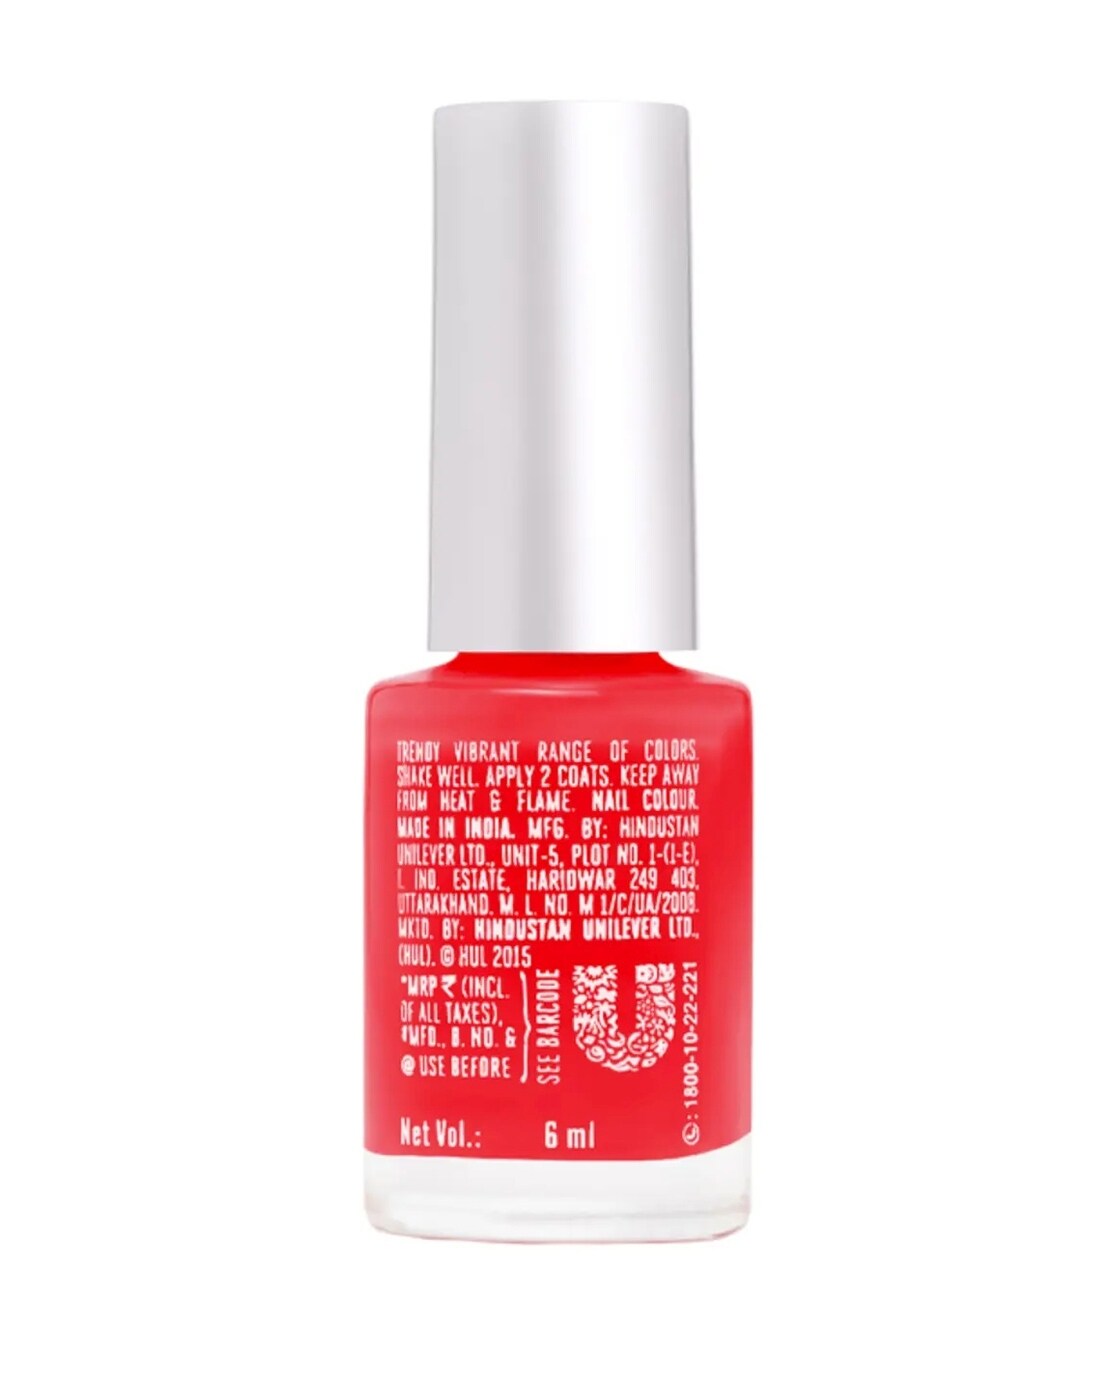 Buy False Nails from top Brands at Best Prices Online in India | Tata CLiQ